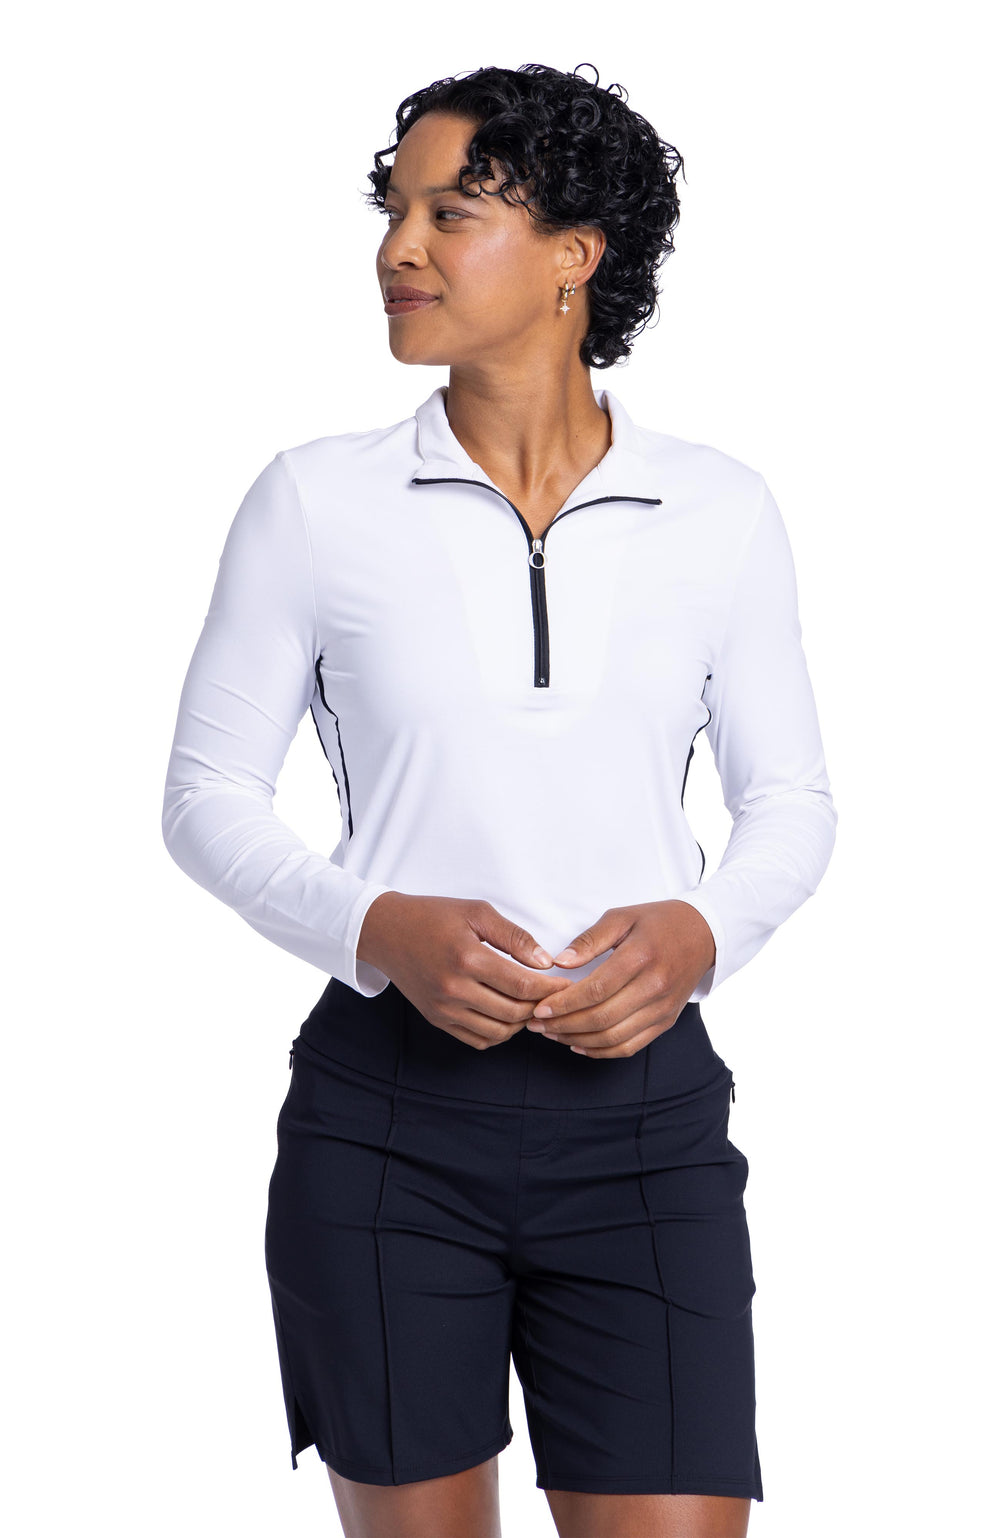 women with longsleeve white keep it covered longsleeve top in white with black trim tucked into a pair of black shorts